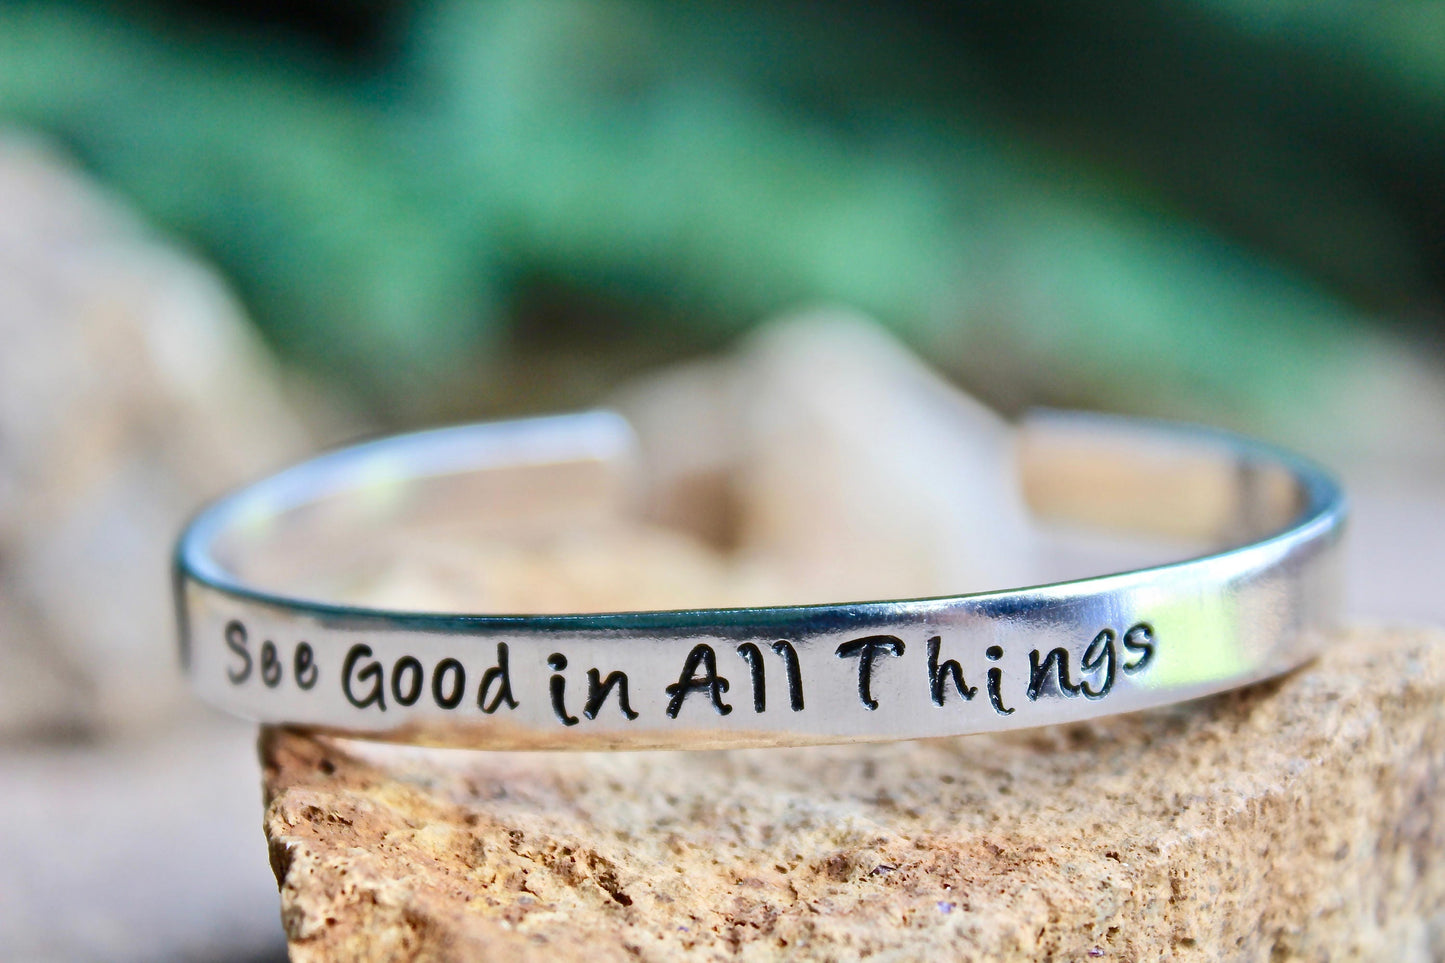 See good in all things Bangle Cuff Bracelet in Aluminum